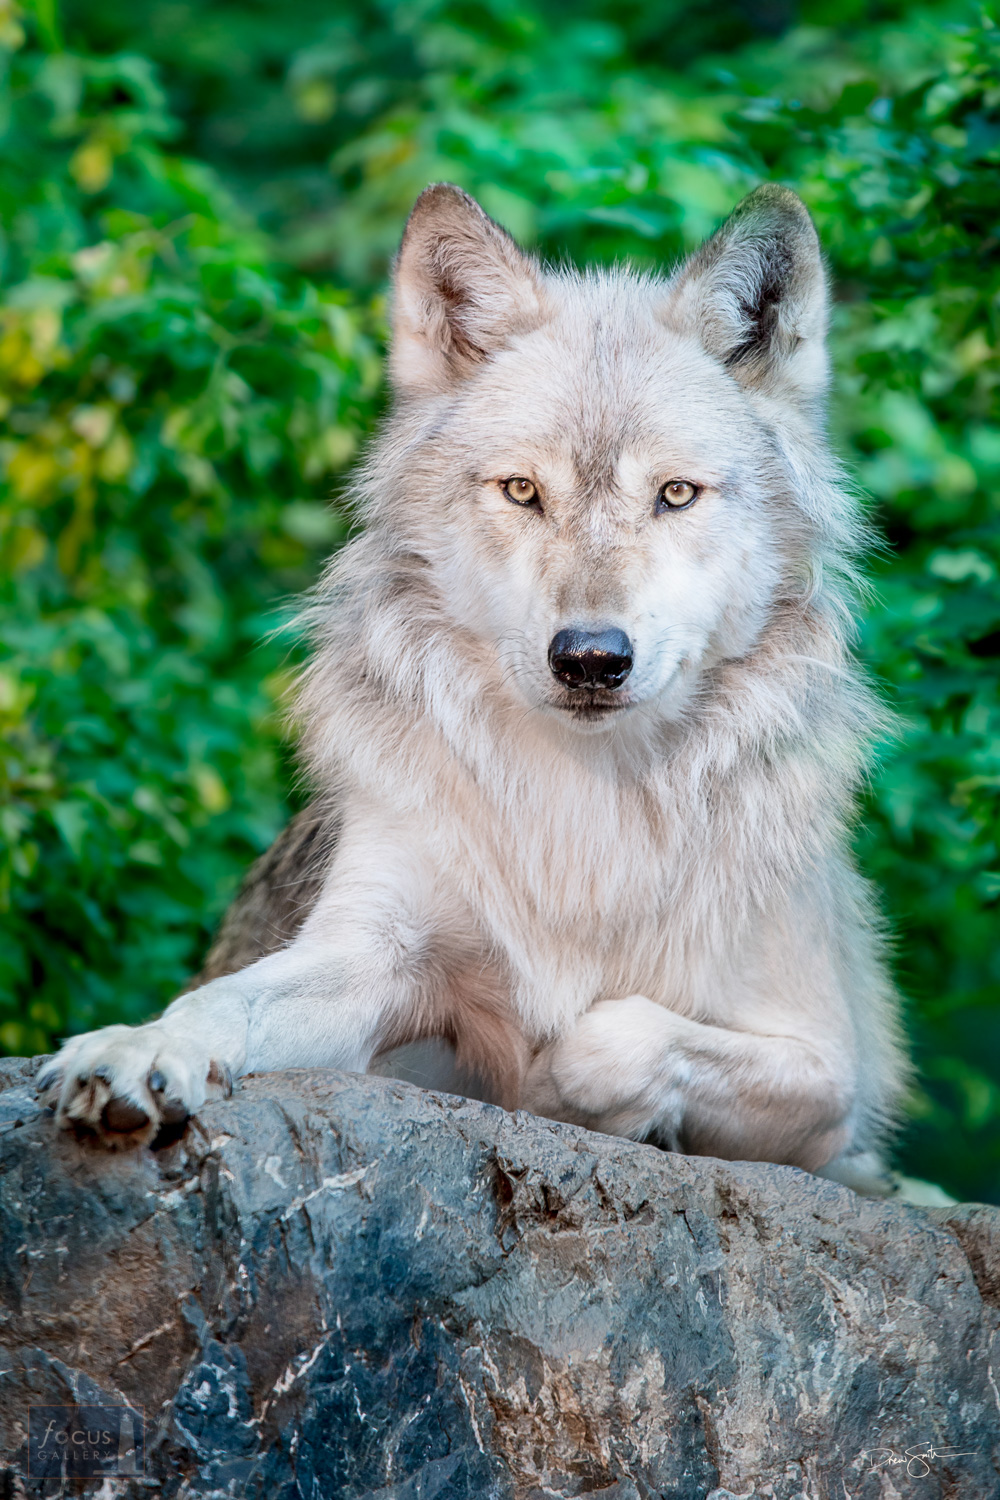 A wolf named Denali rests atop a boulder at the International Wolf Center in Ely, Minnesota.